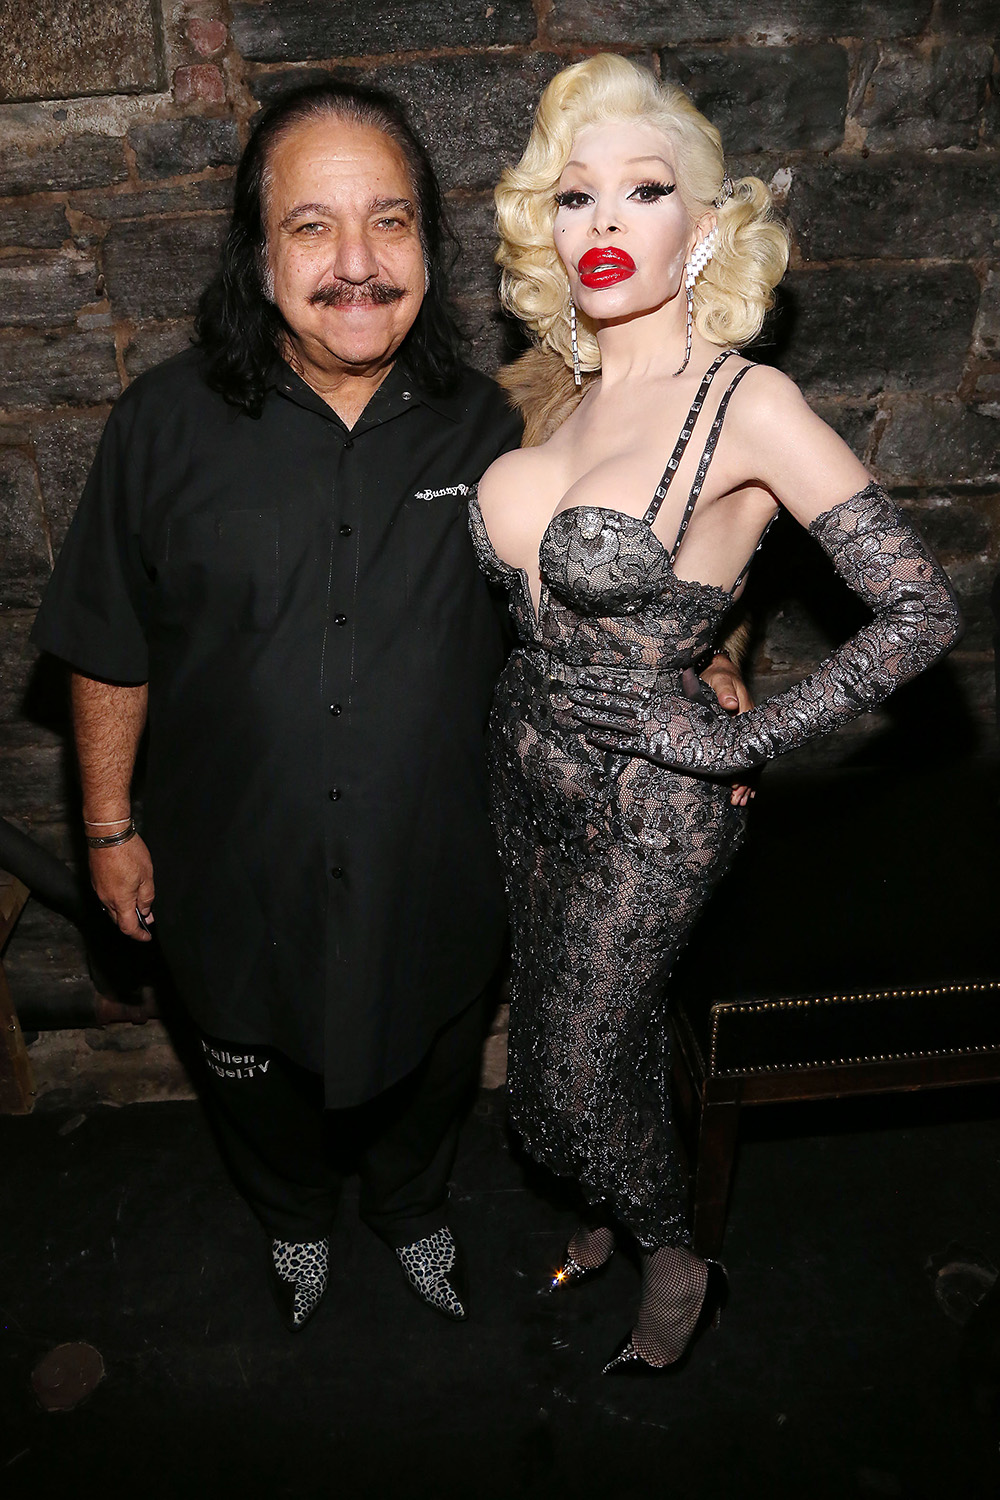 dennis barcinas share ron jeremy when young photos